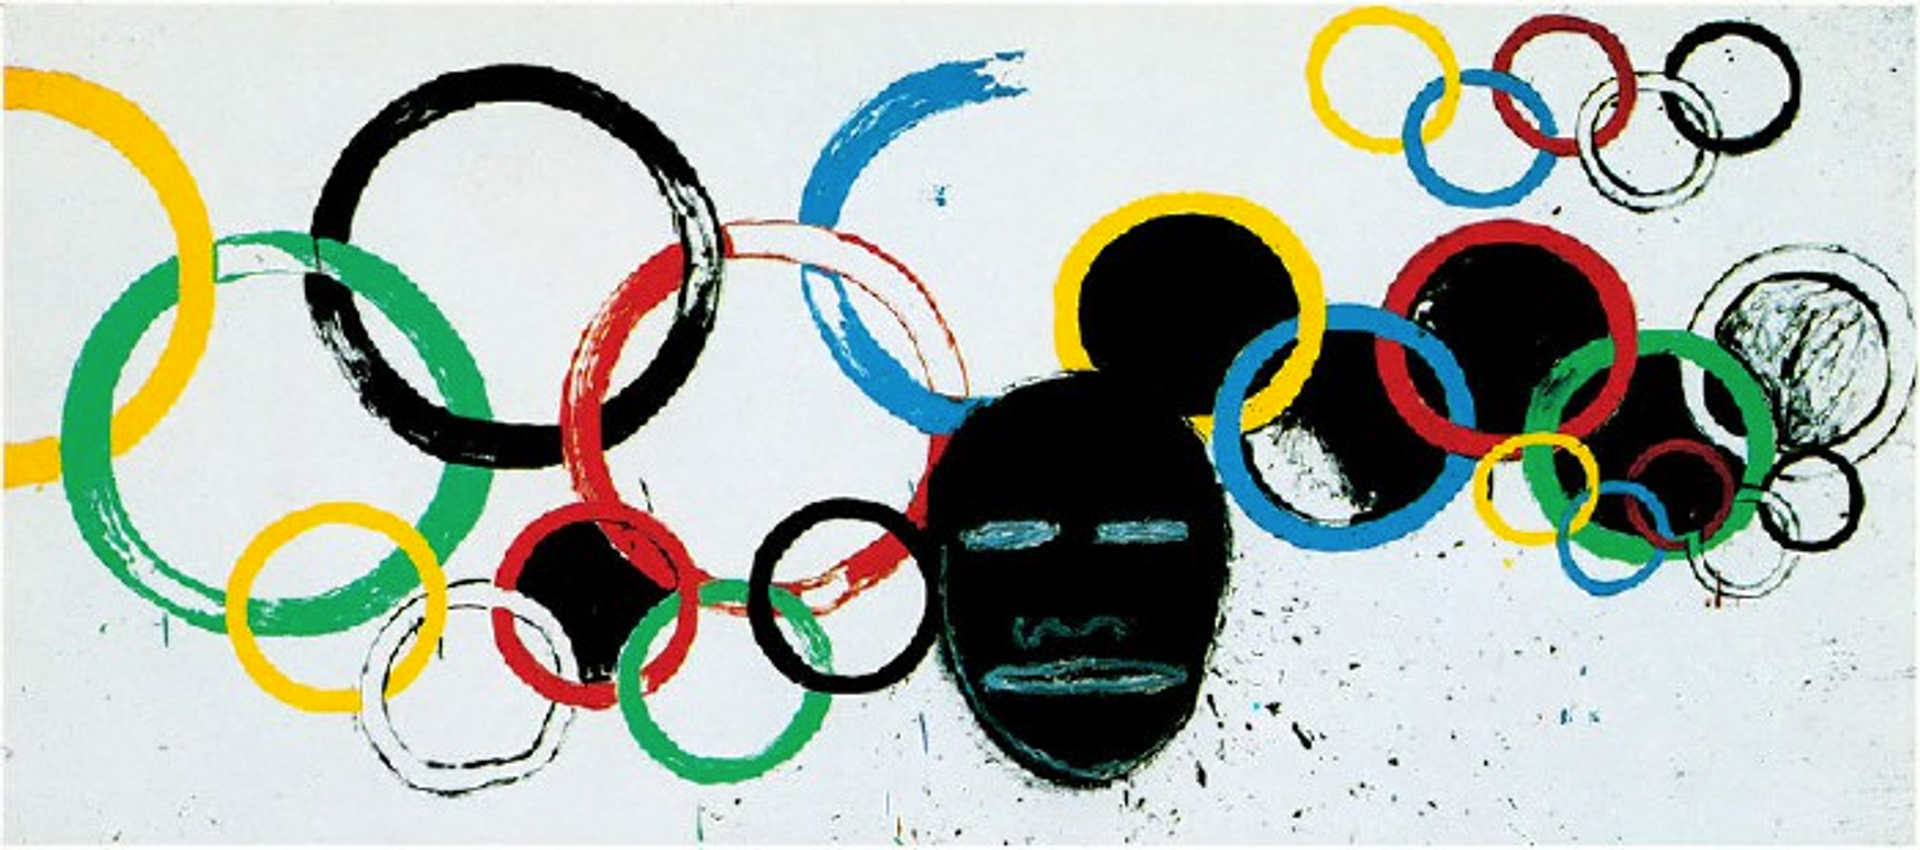 Pop Art style olympic rings with Neo-Expressionist figurehead